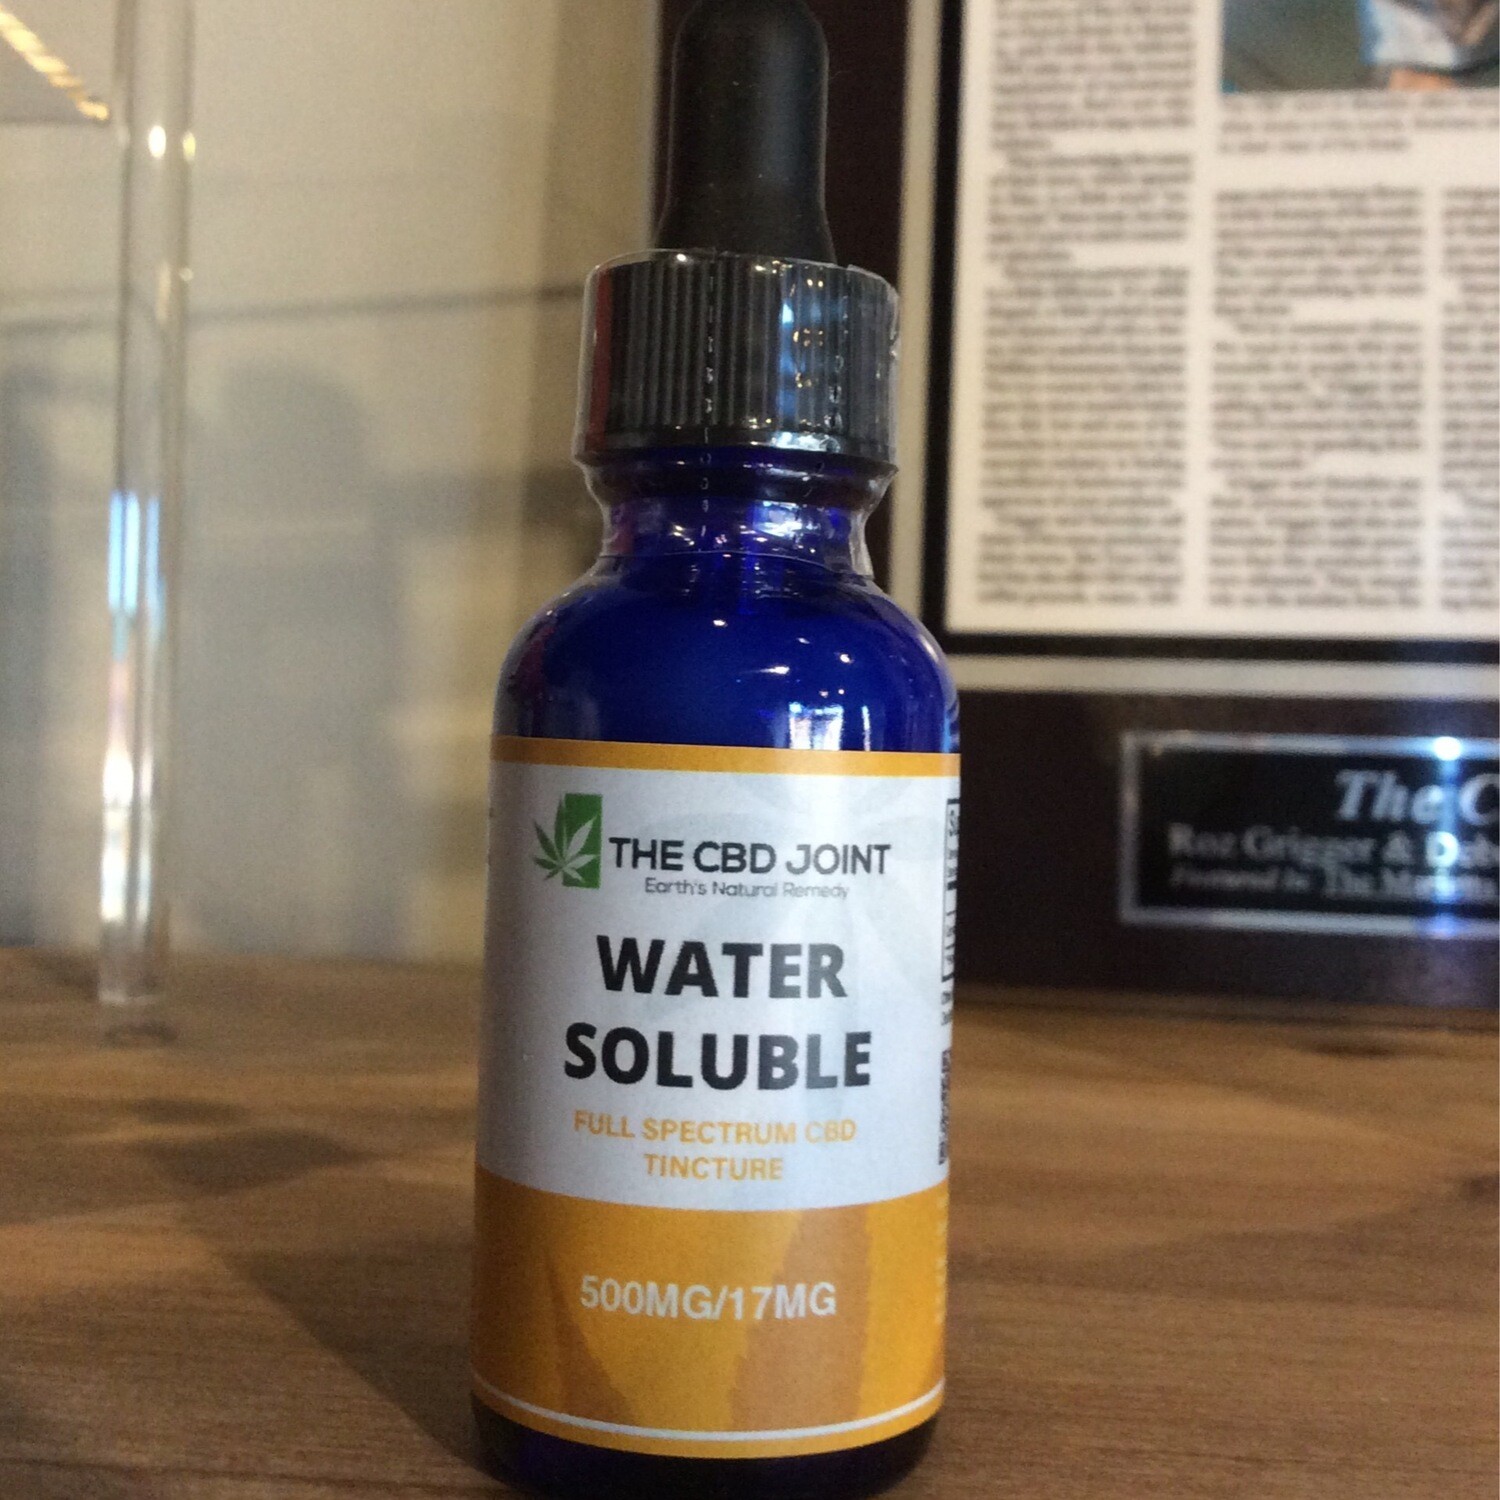 The CBD Joint's Water Soluble